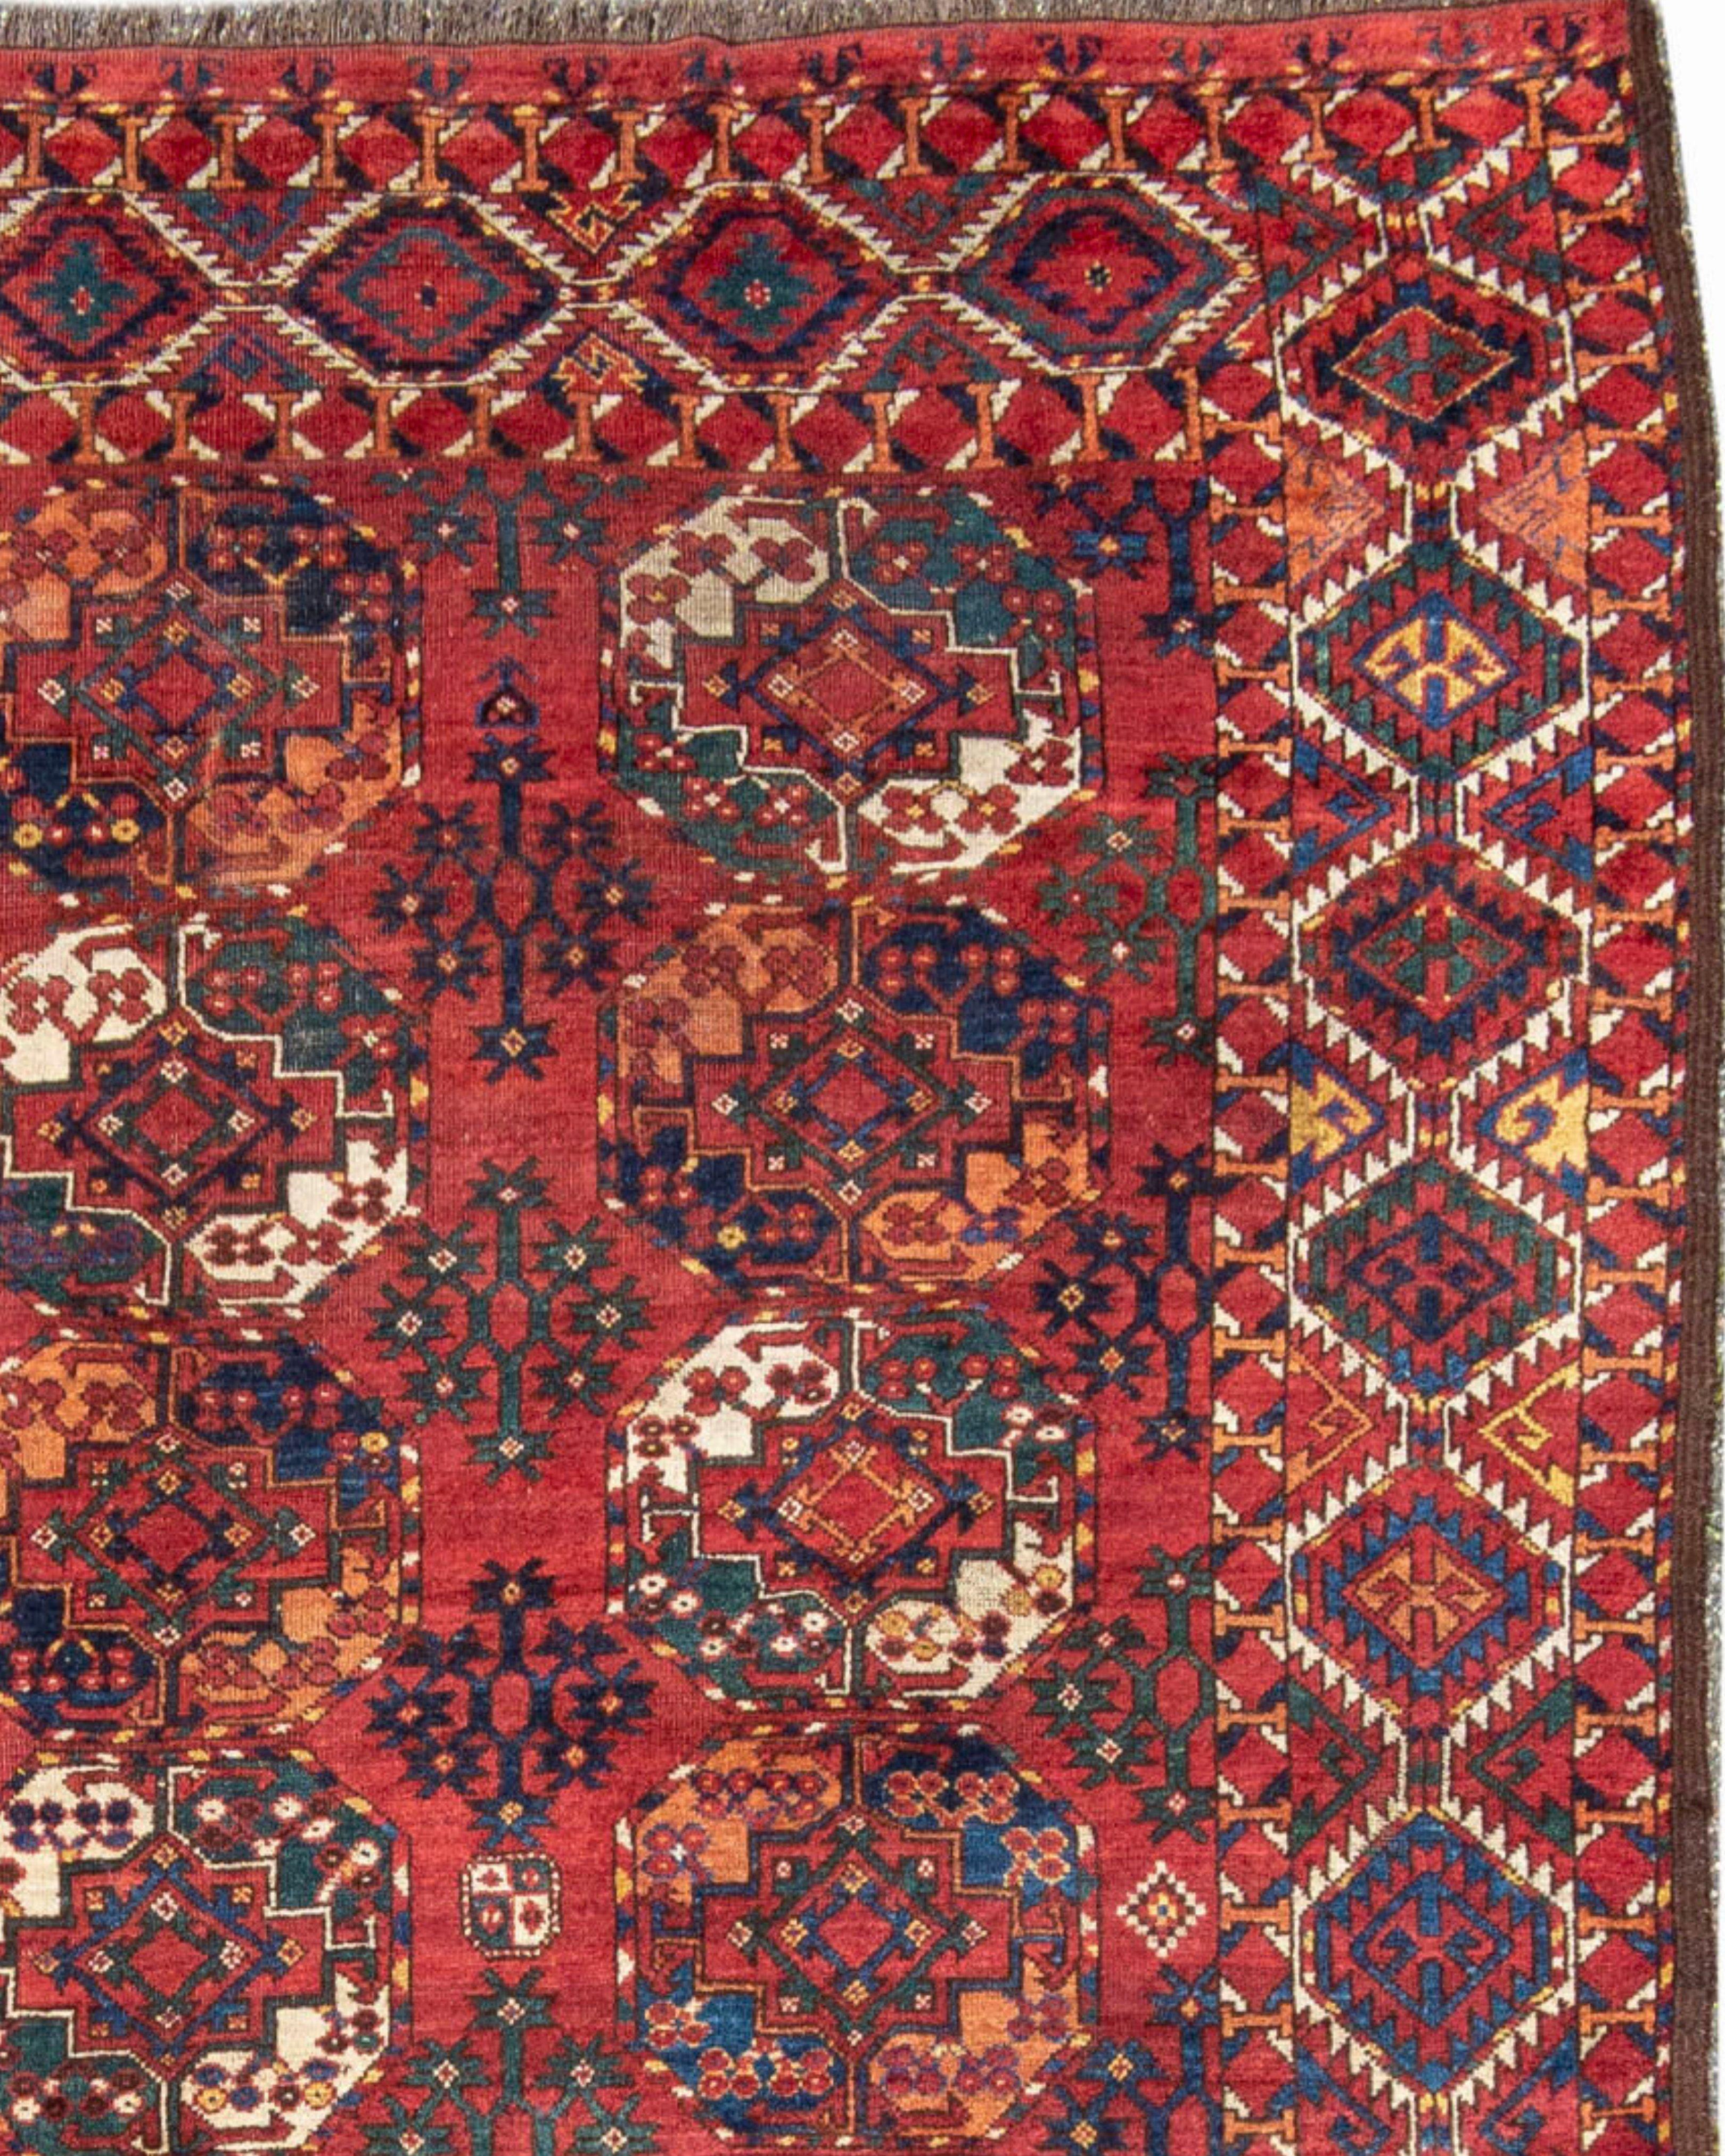 Antique Afghan Rug Ersari Main Carpet, 19th Century

Very good condition with slight wear in one area.

Additional Information
Dimensions: 7'10